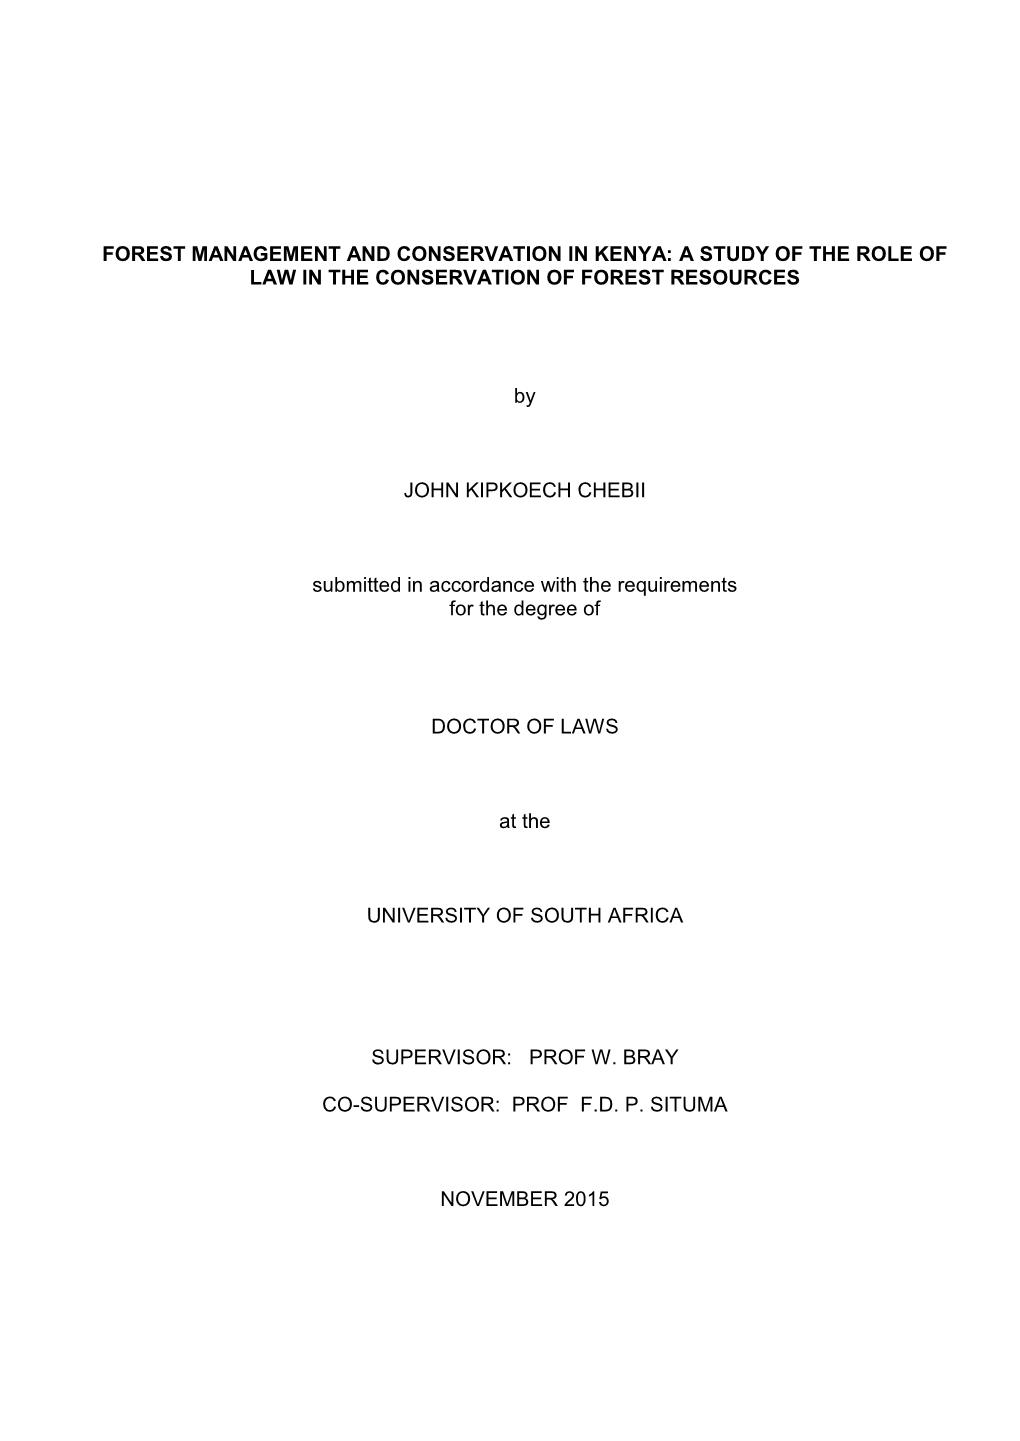 Forest Management and Conservation in Kenya: a Study of the Role of Law in the Conservation of Forest Resources